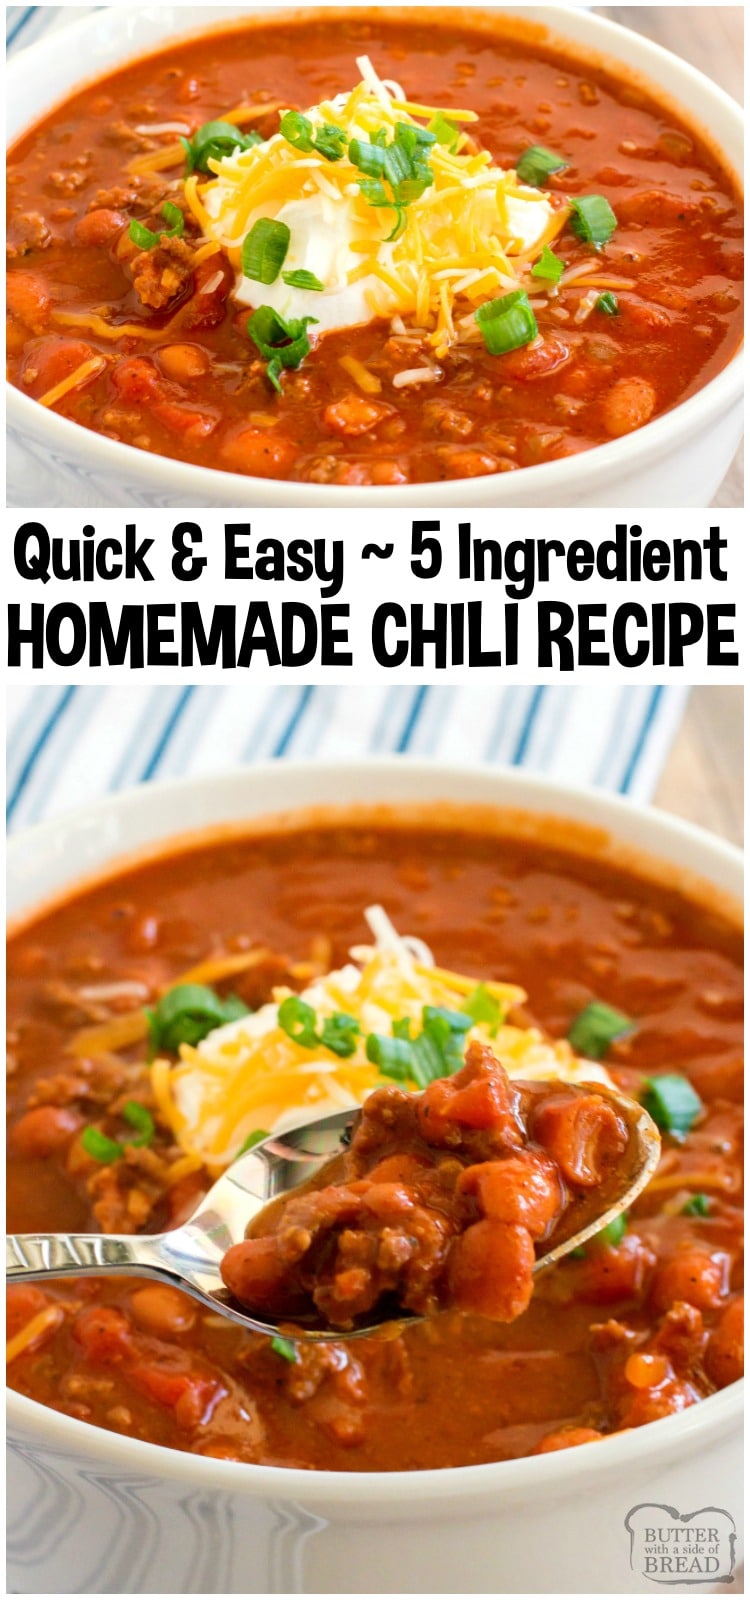 Easy Chili Recipe made in under hours with 5 ingredients! This flavorful and easy chili recipe made on the stove will be perfect for any family dinner.